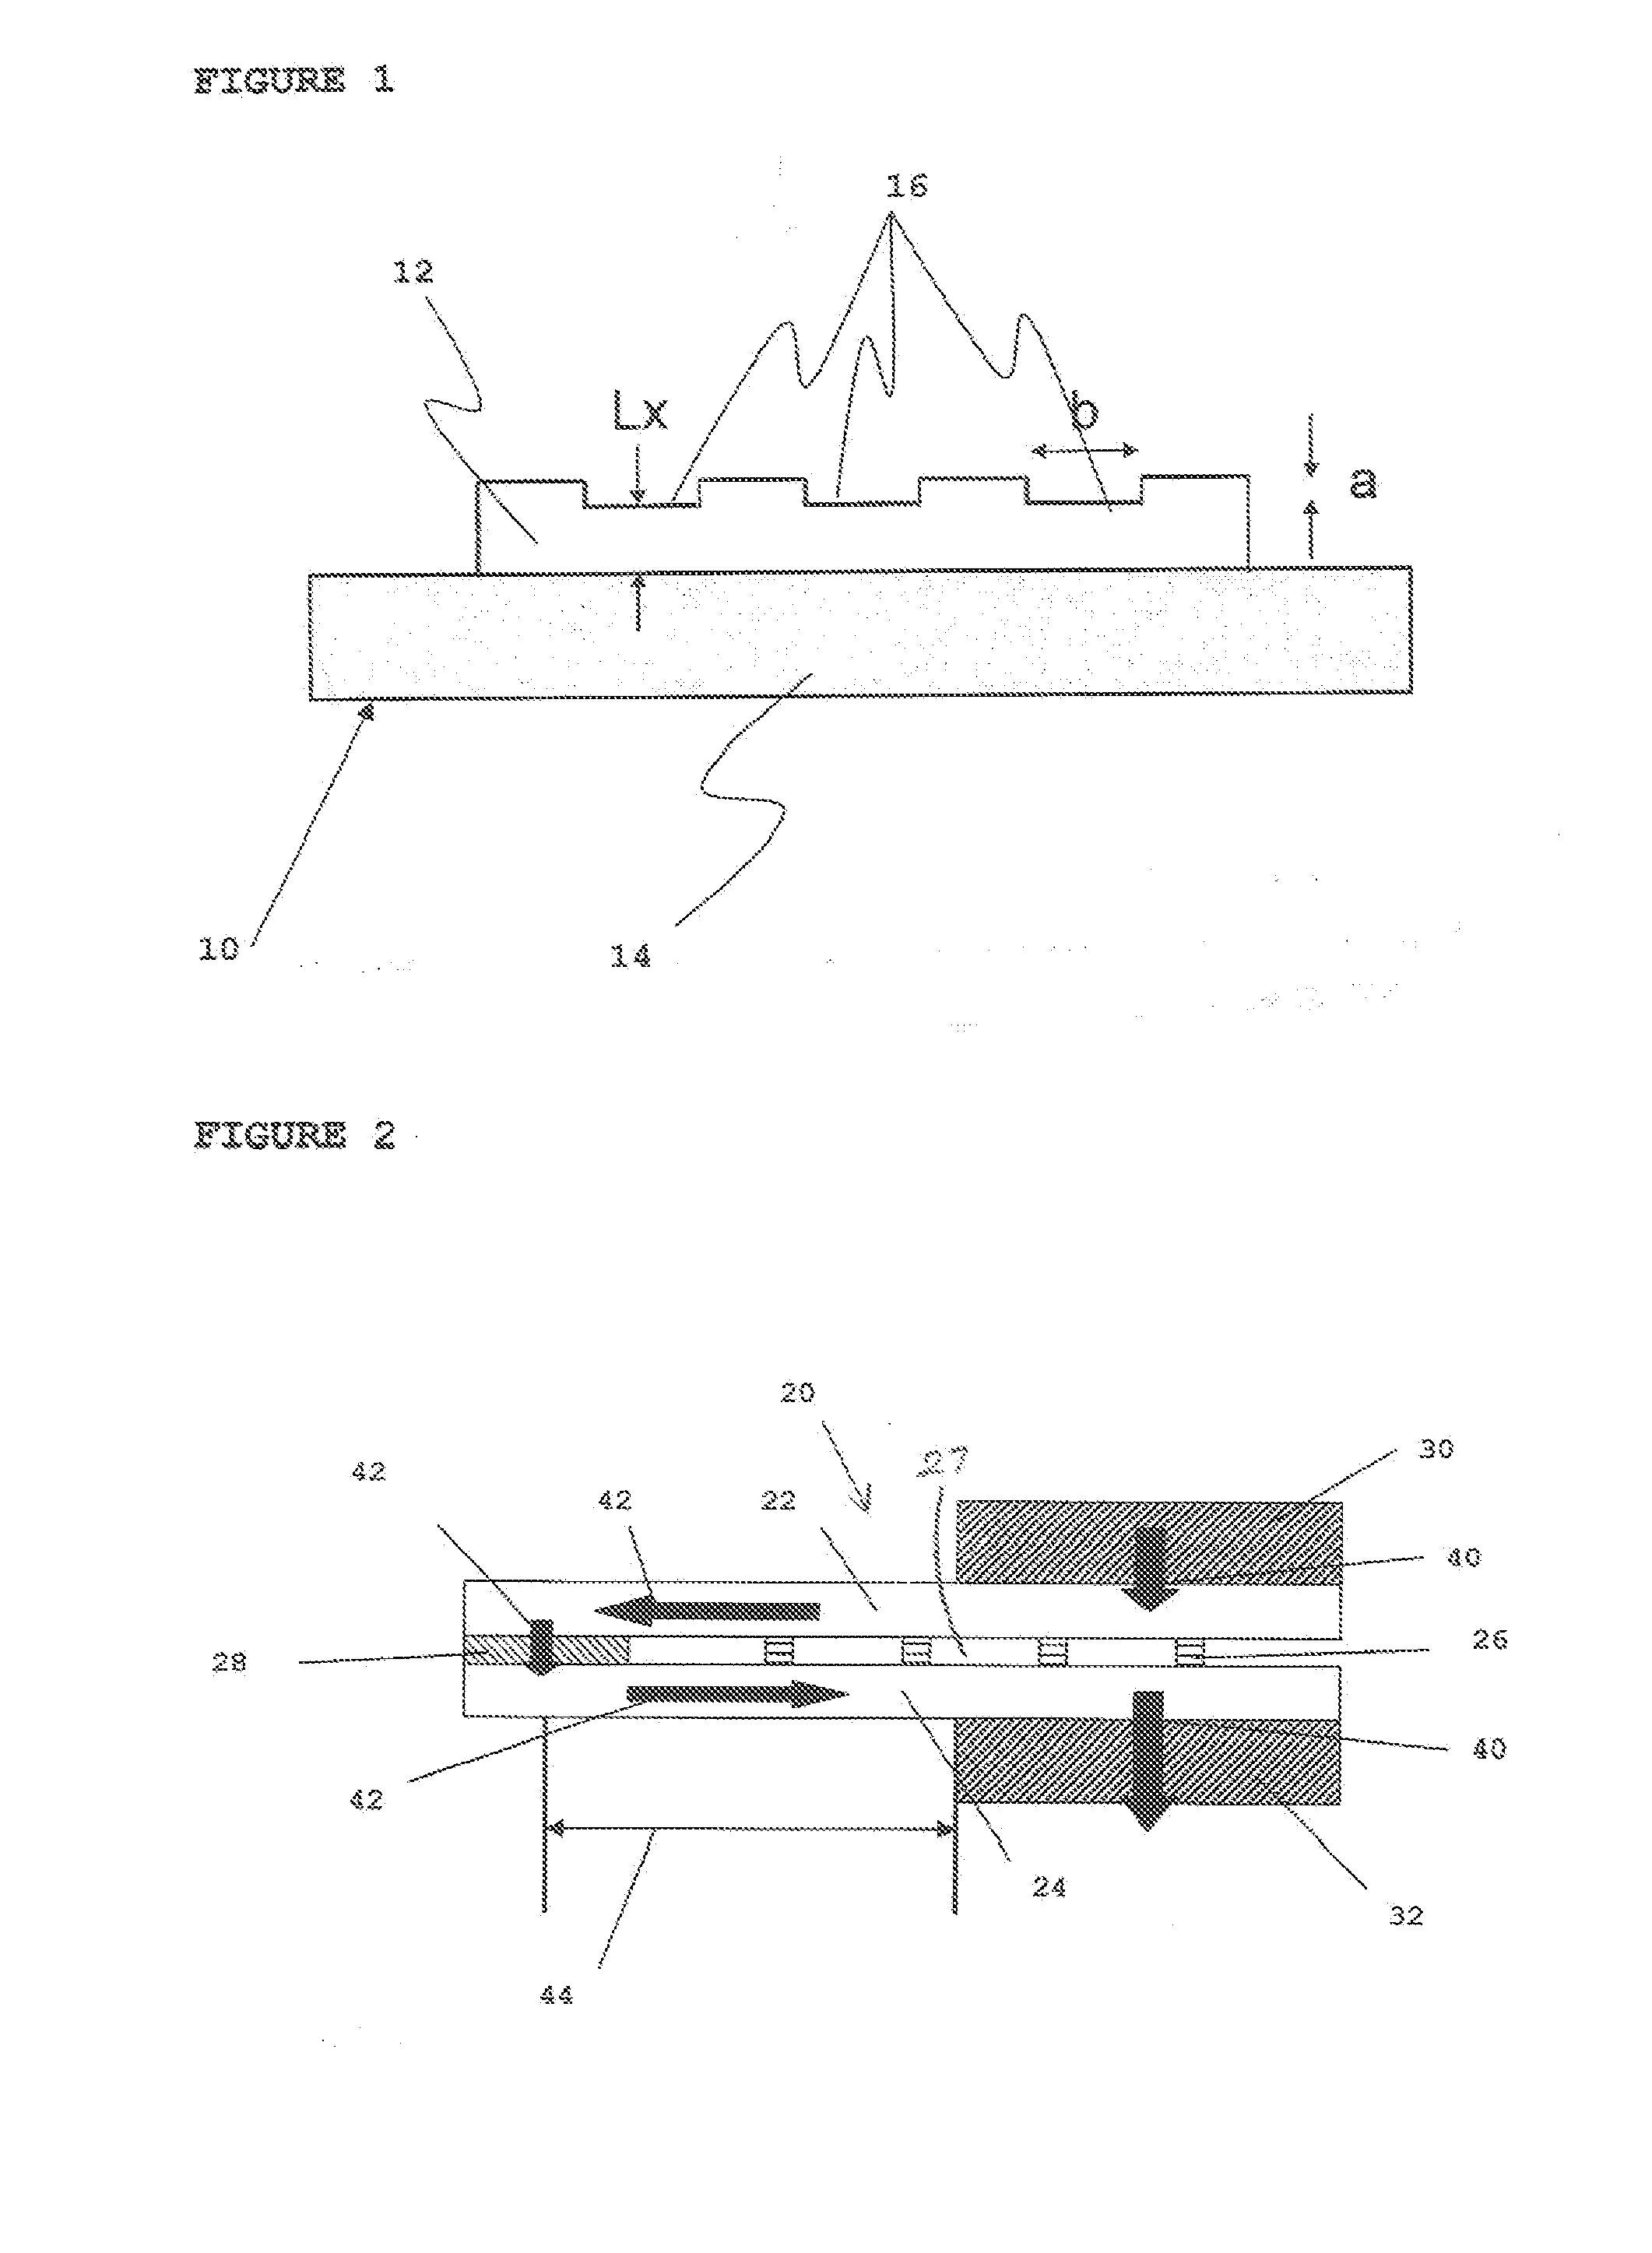 Method and System for High Efficiency Electricity Generation Using Low Energy Thermal Heat Generation and Thermionic Devices